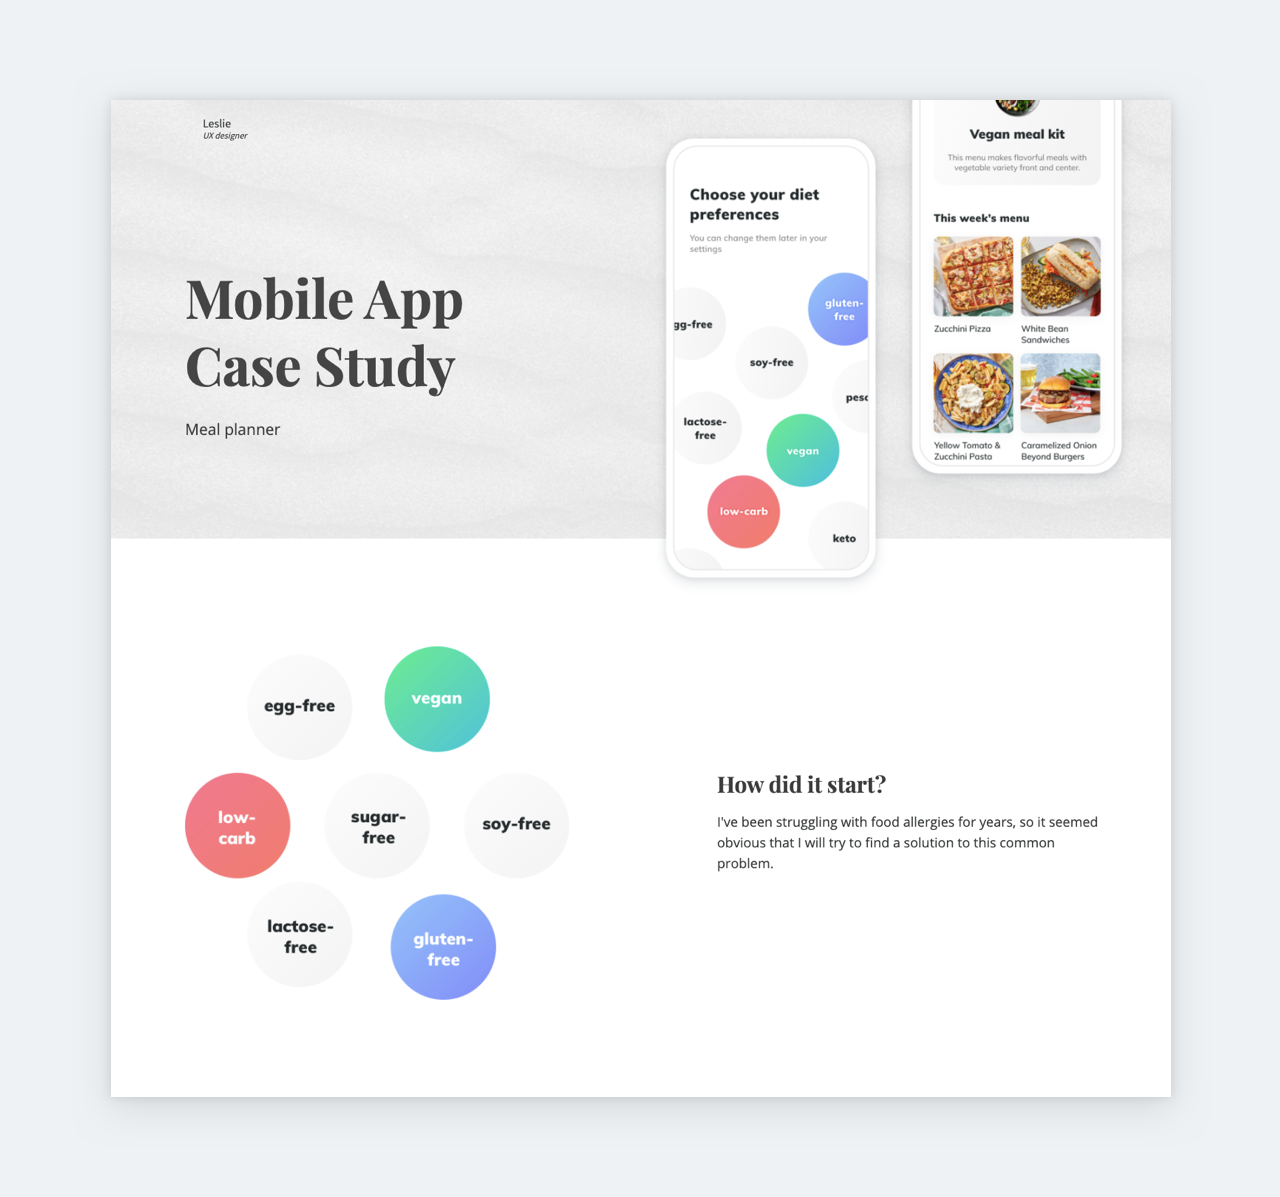 Screenshot of the Meal Planner case study by Leslie